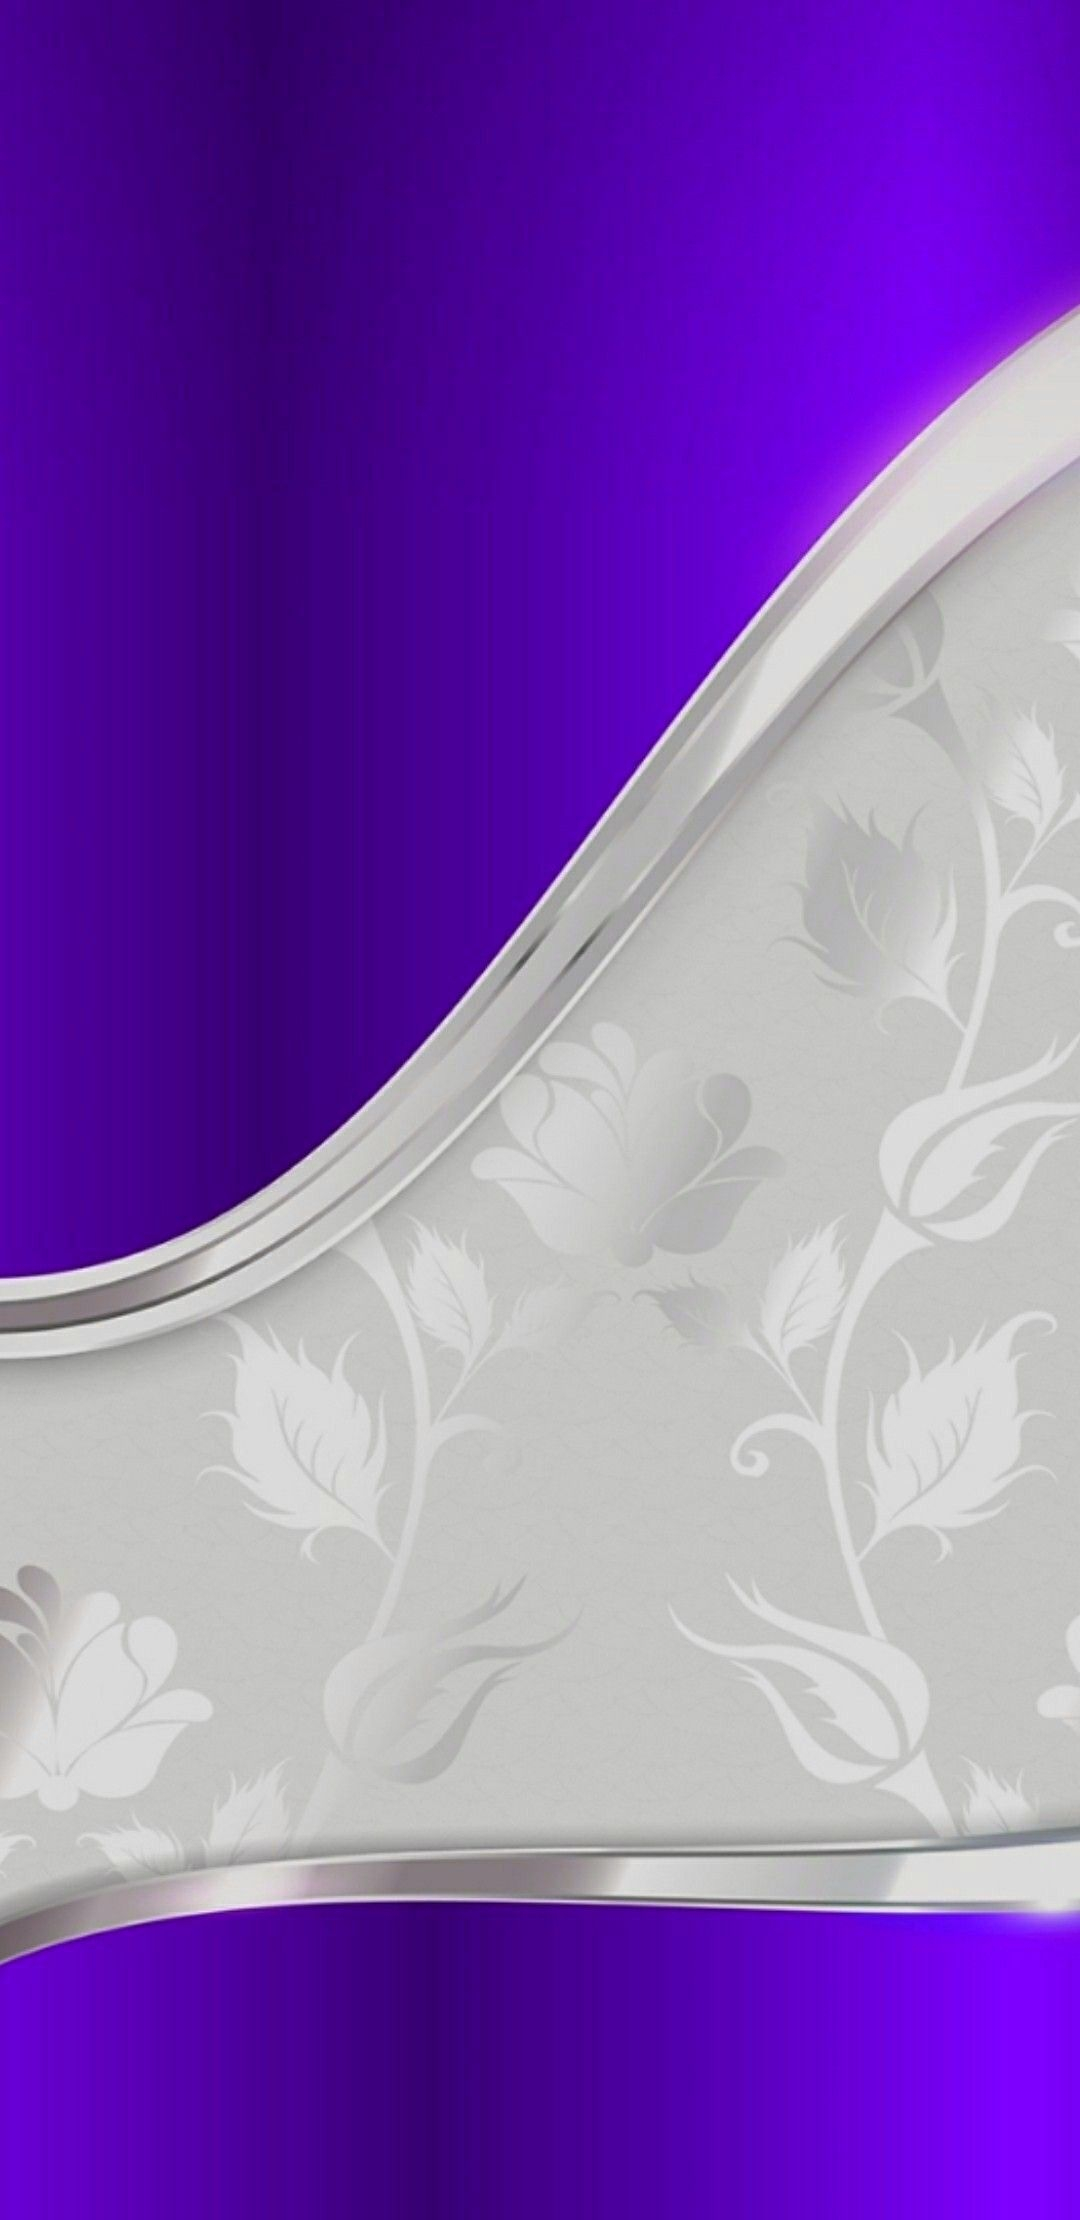 1080x2220 Purple \u0026 Silver By Artist | Purple and silver wallpaper, Bling wallpaper, Backgrounds phone wallpapers